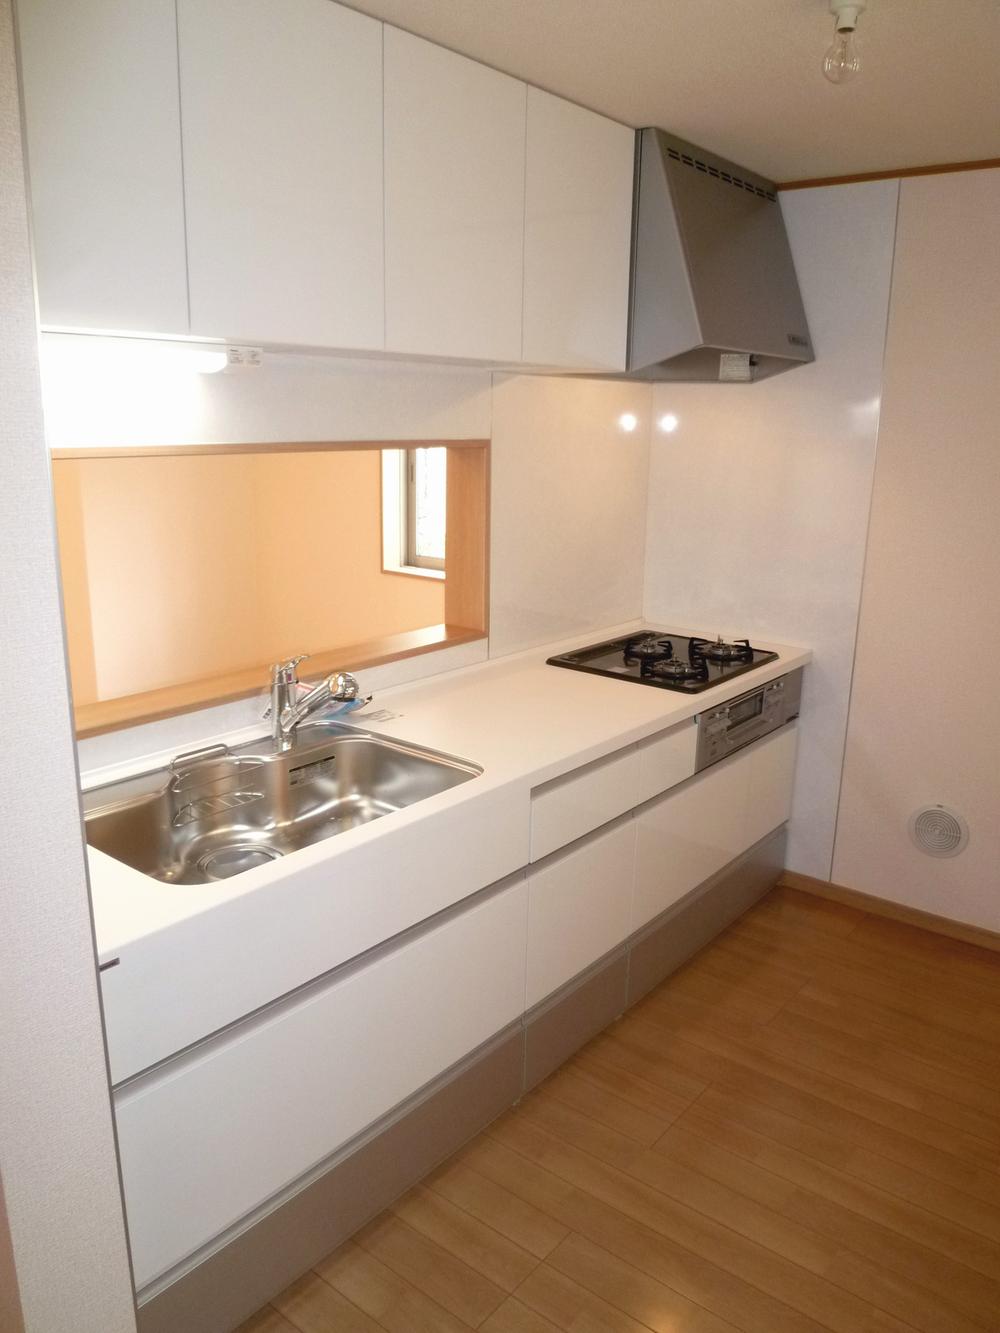 Same specifications photo (kitchen). Kitchen face-to-face kitchen can enjoy conversation while also seeing how the (construction cases) LD Of course, water purifier is also standard specification